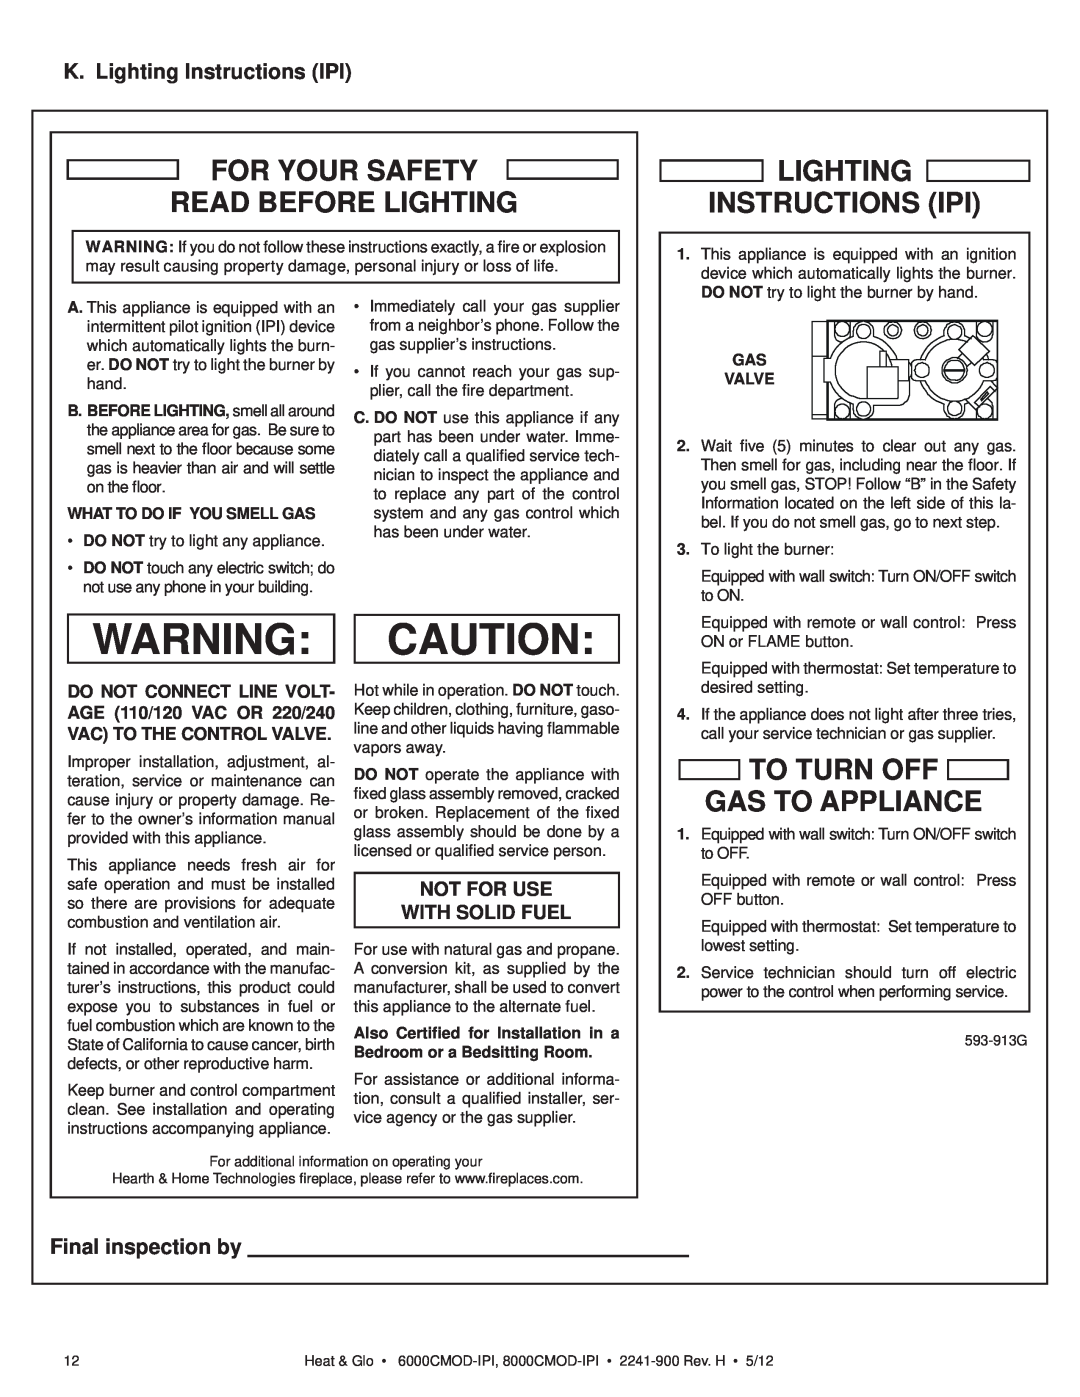 Heat & Glo LifeStyle 8000CMOD-IPI K. Lighting Instructions IPI, Final inspection by, For Your Safety Read Before Lighting 